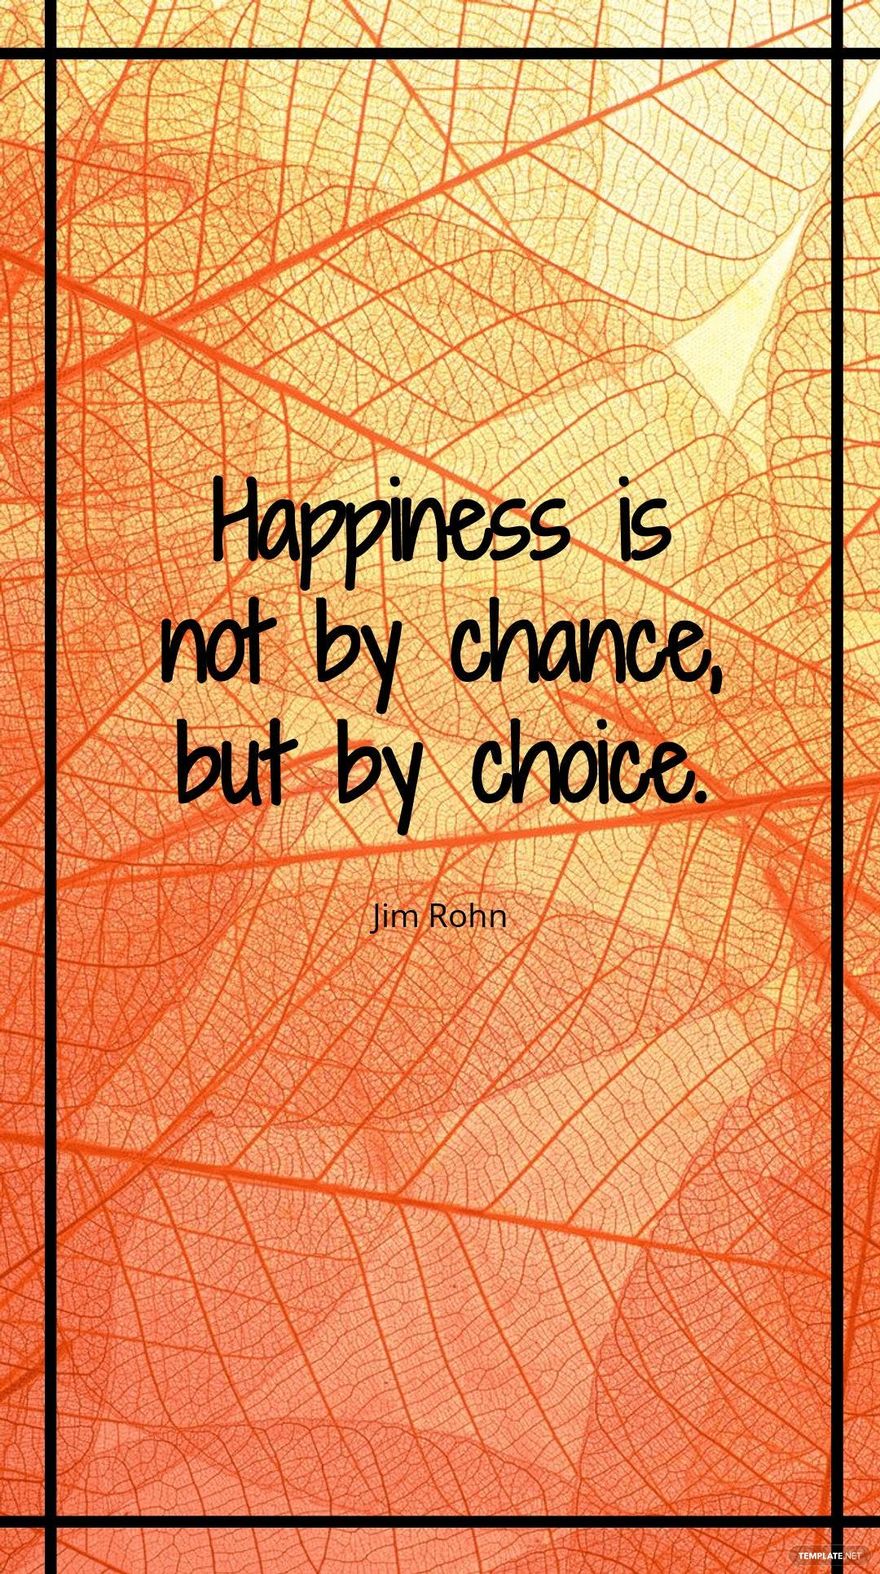 Jim Rohn - Happiness is not by chance, but by choice.